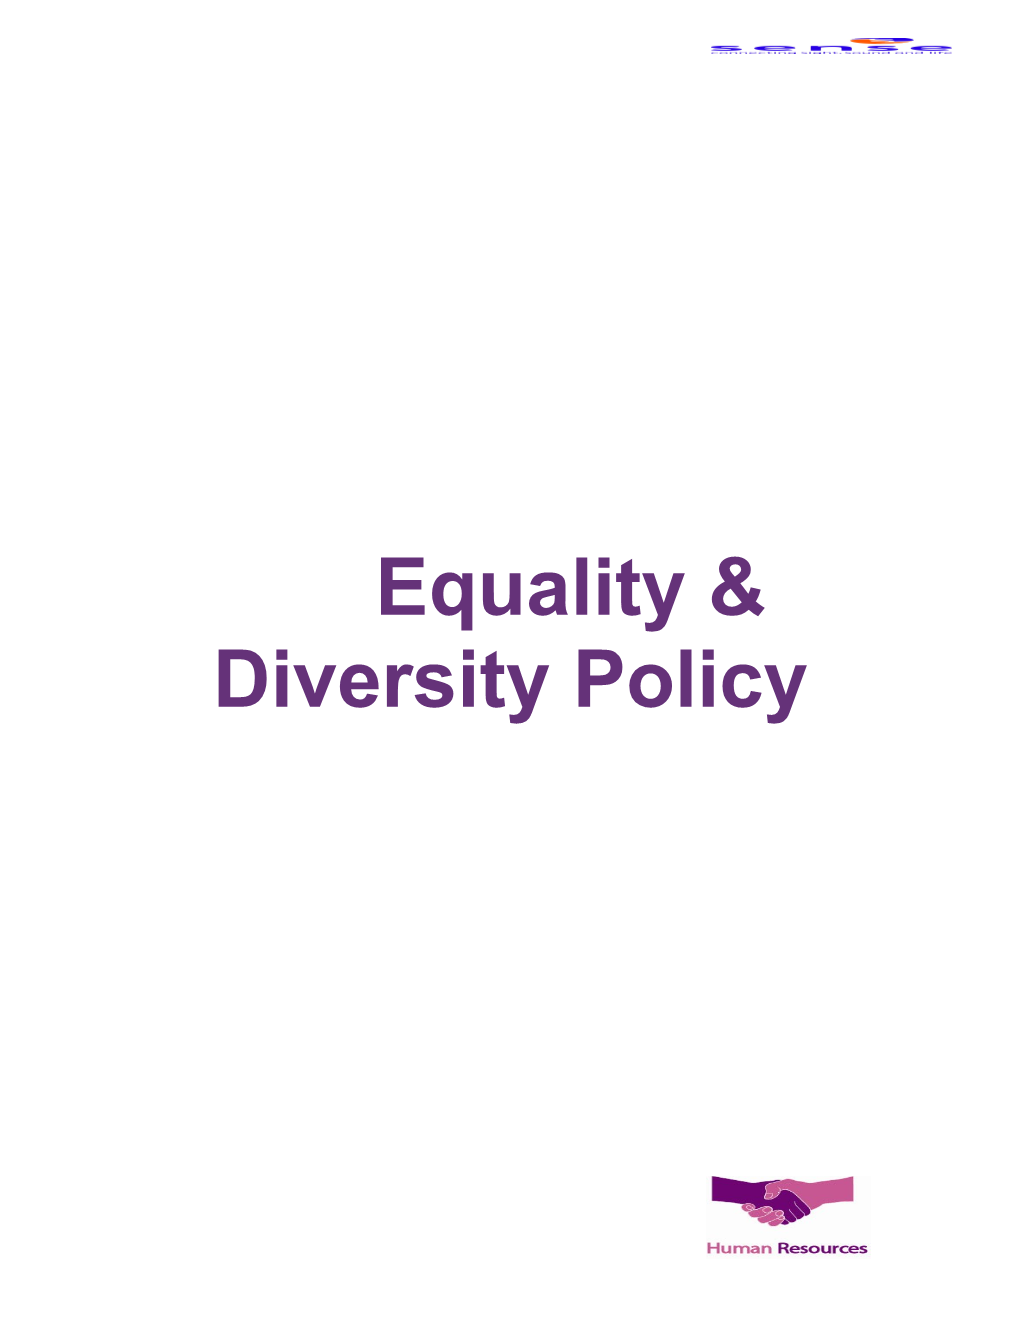 Diversity Policy Draft 1